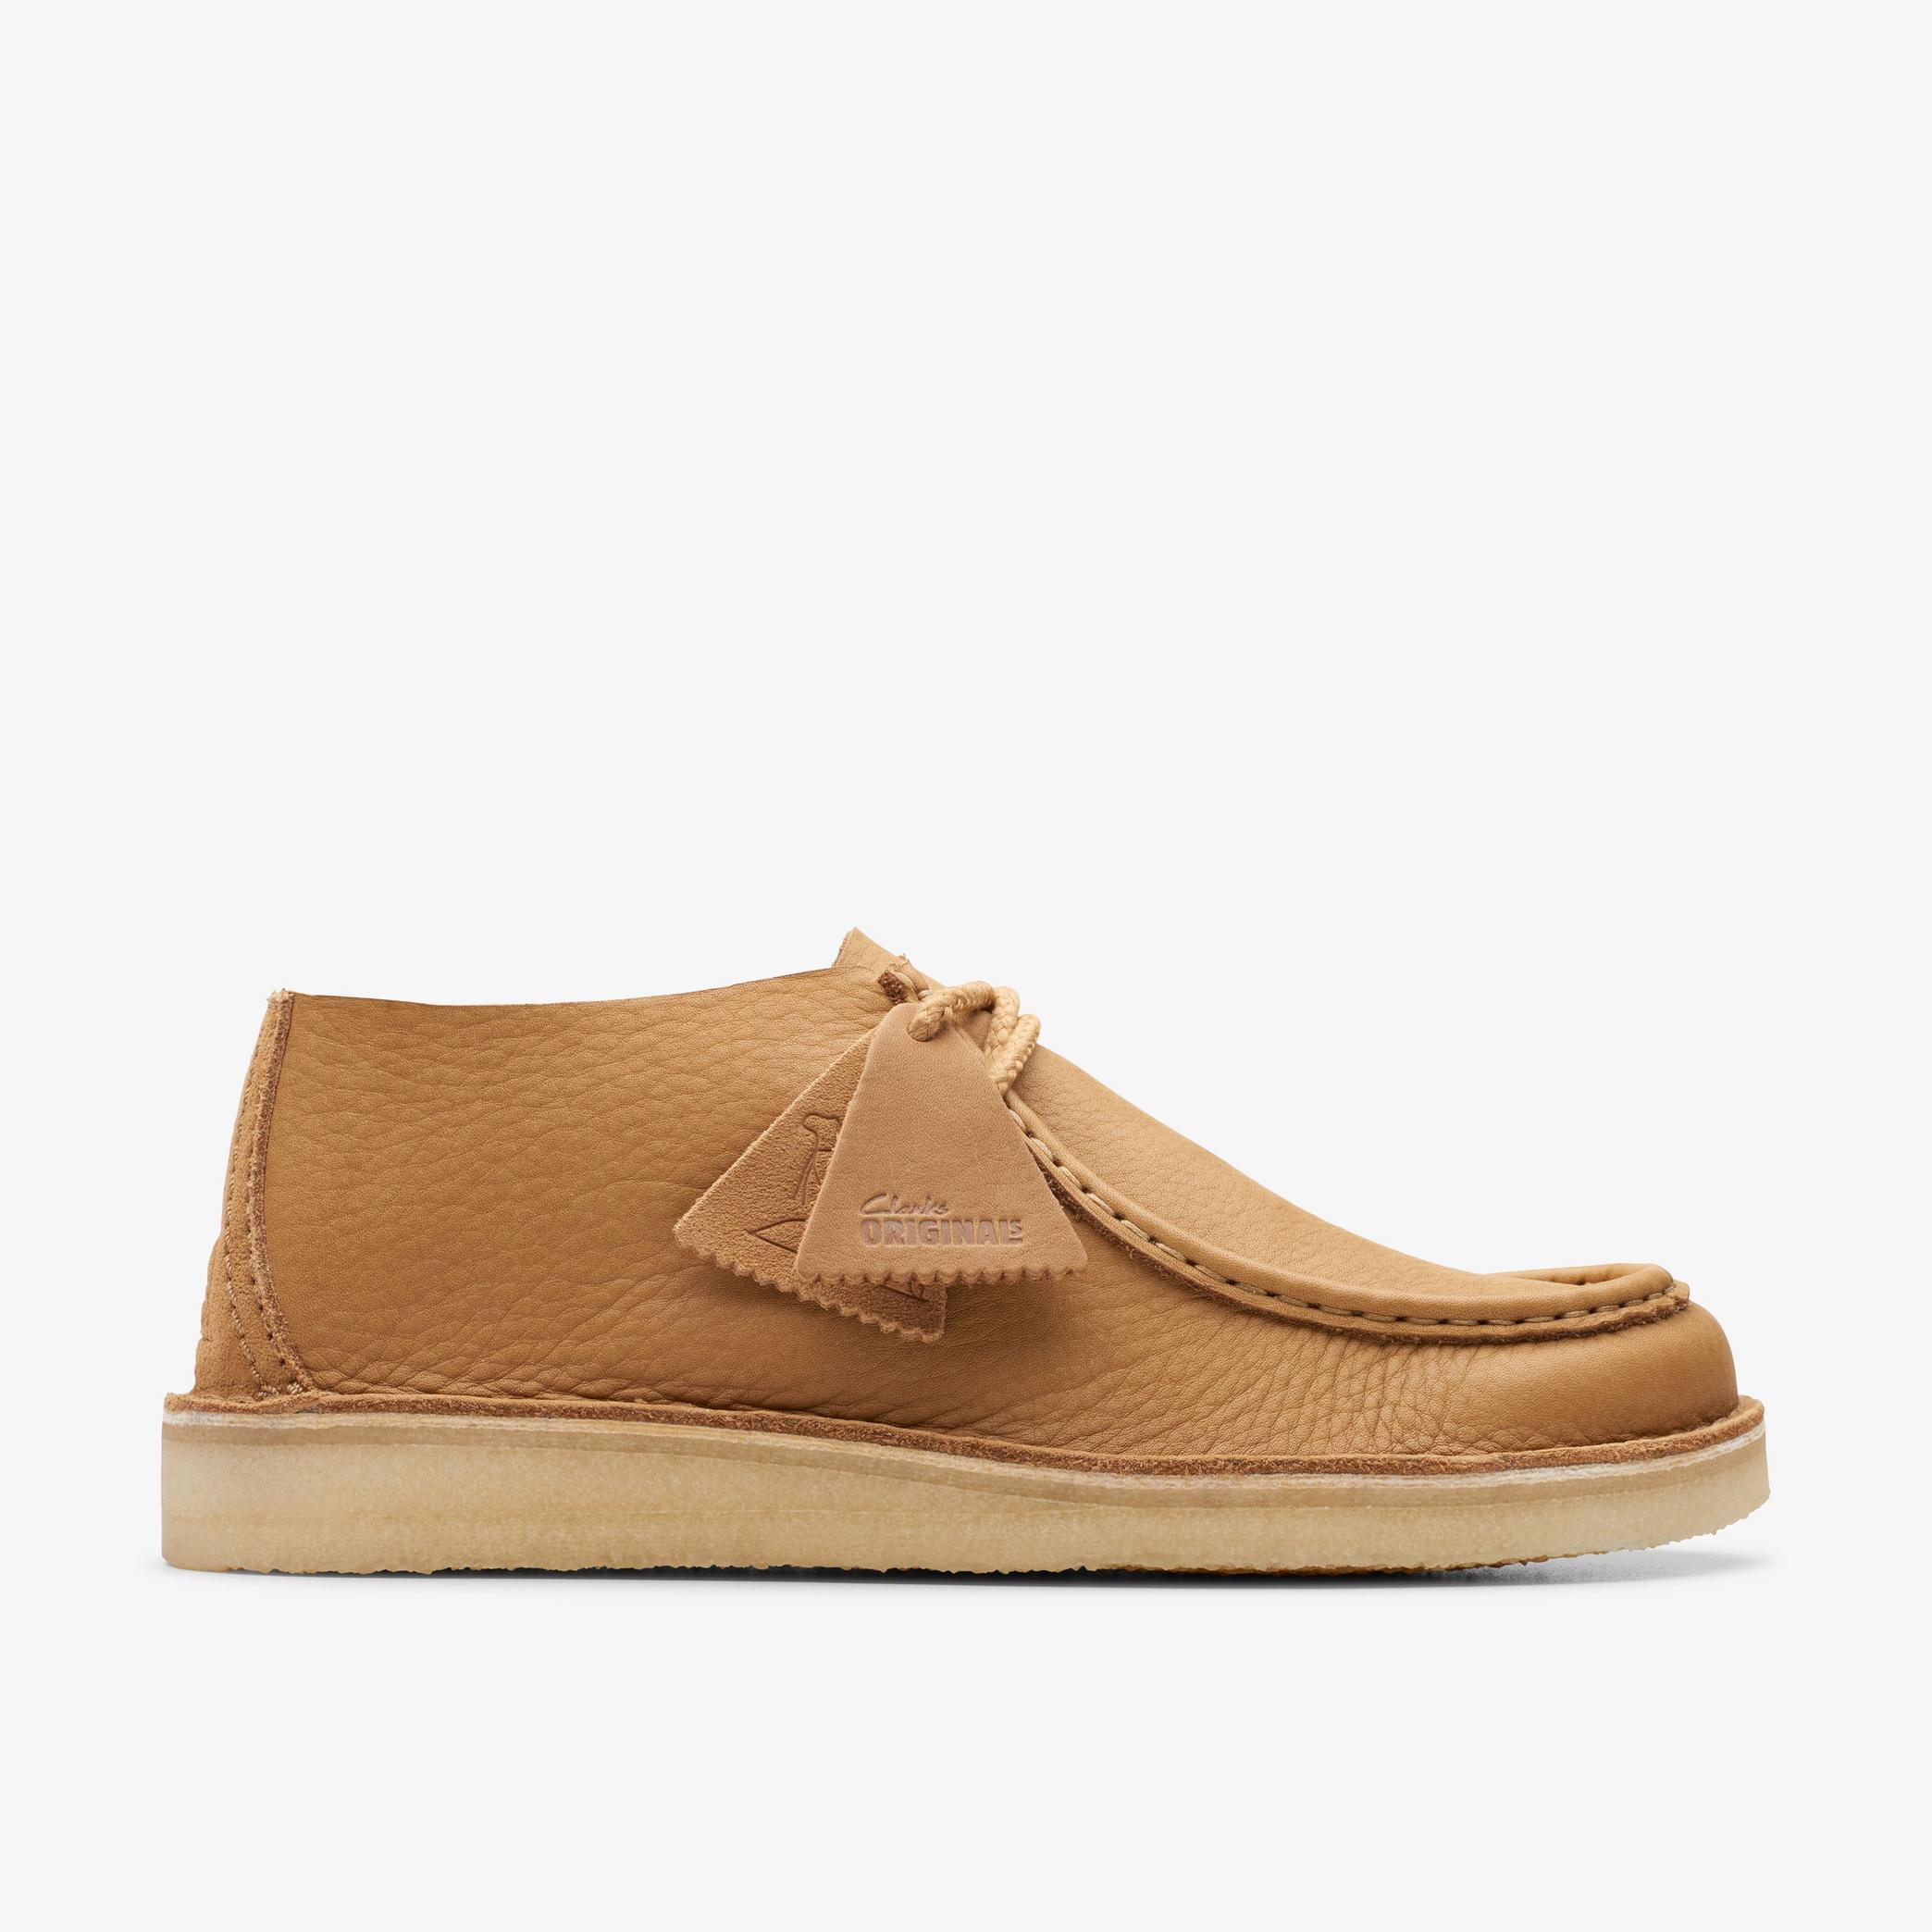 Desert Nomad Mid Tan Leather Moccasins, view 1 of 6